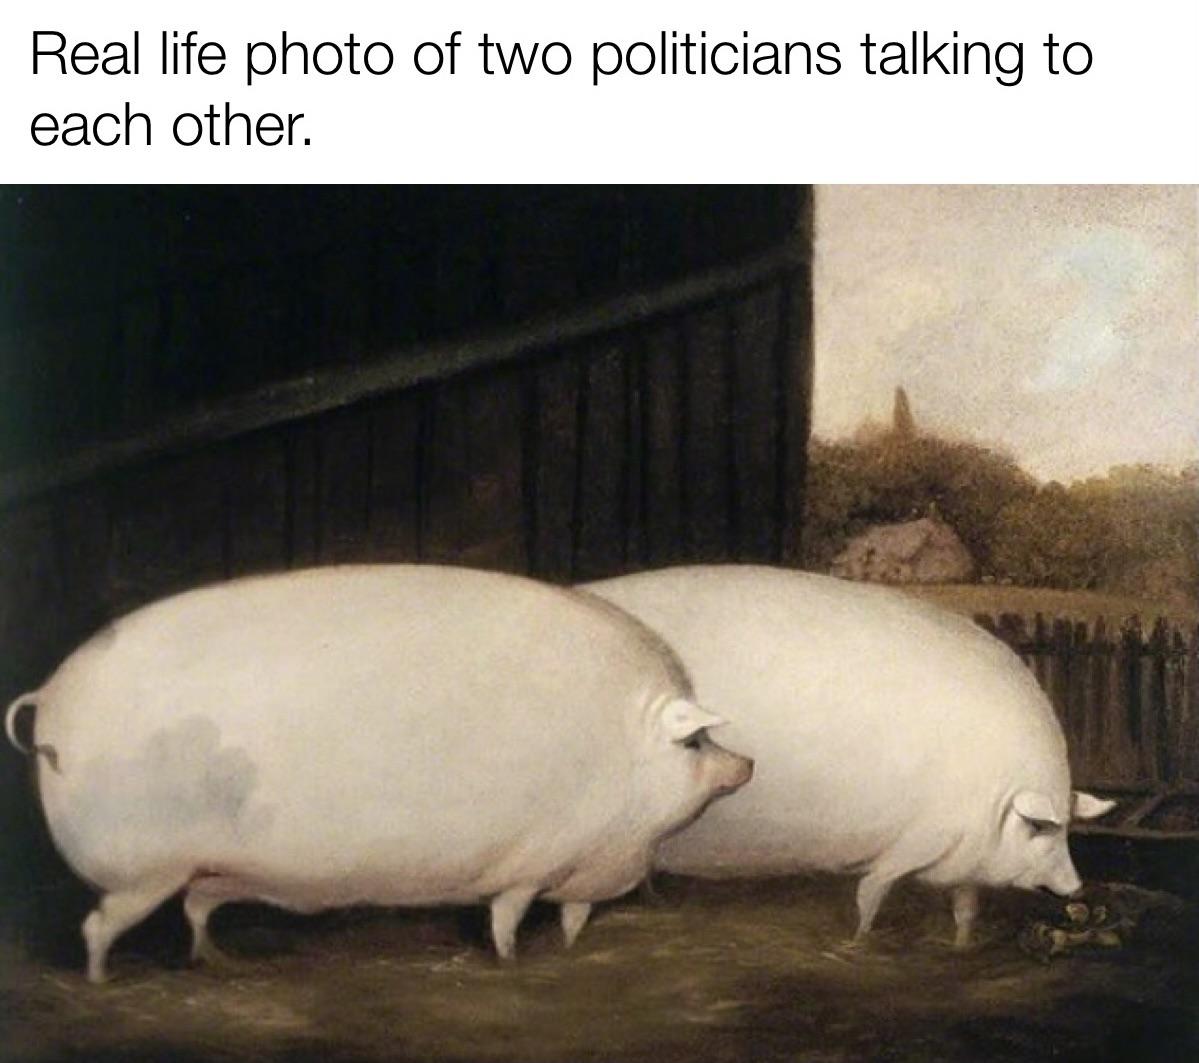 oats pig meme - Real life photo of two politicians talking to each other.